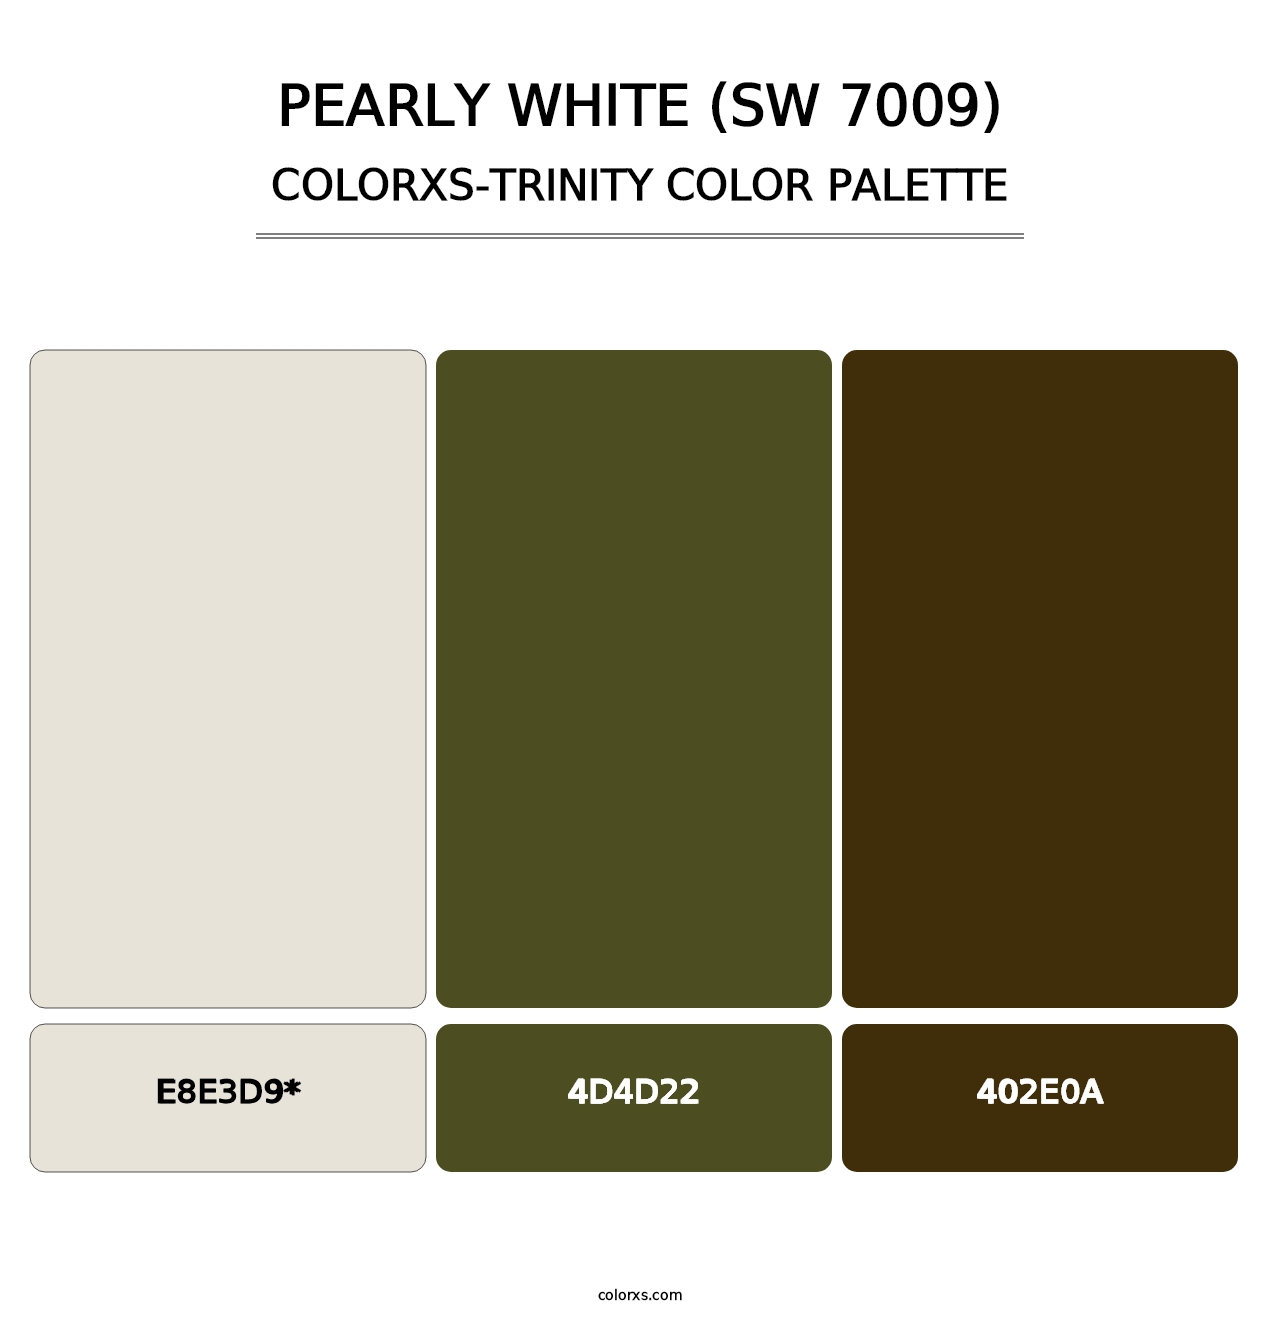 Pearly White (SW 7009) - Colorxs Trinity Palette